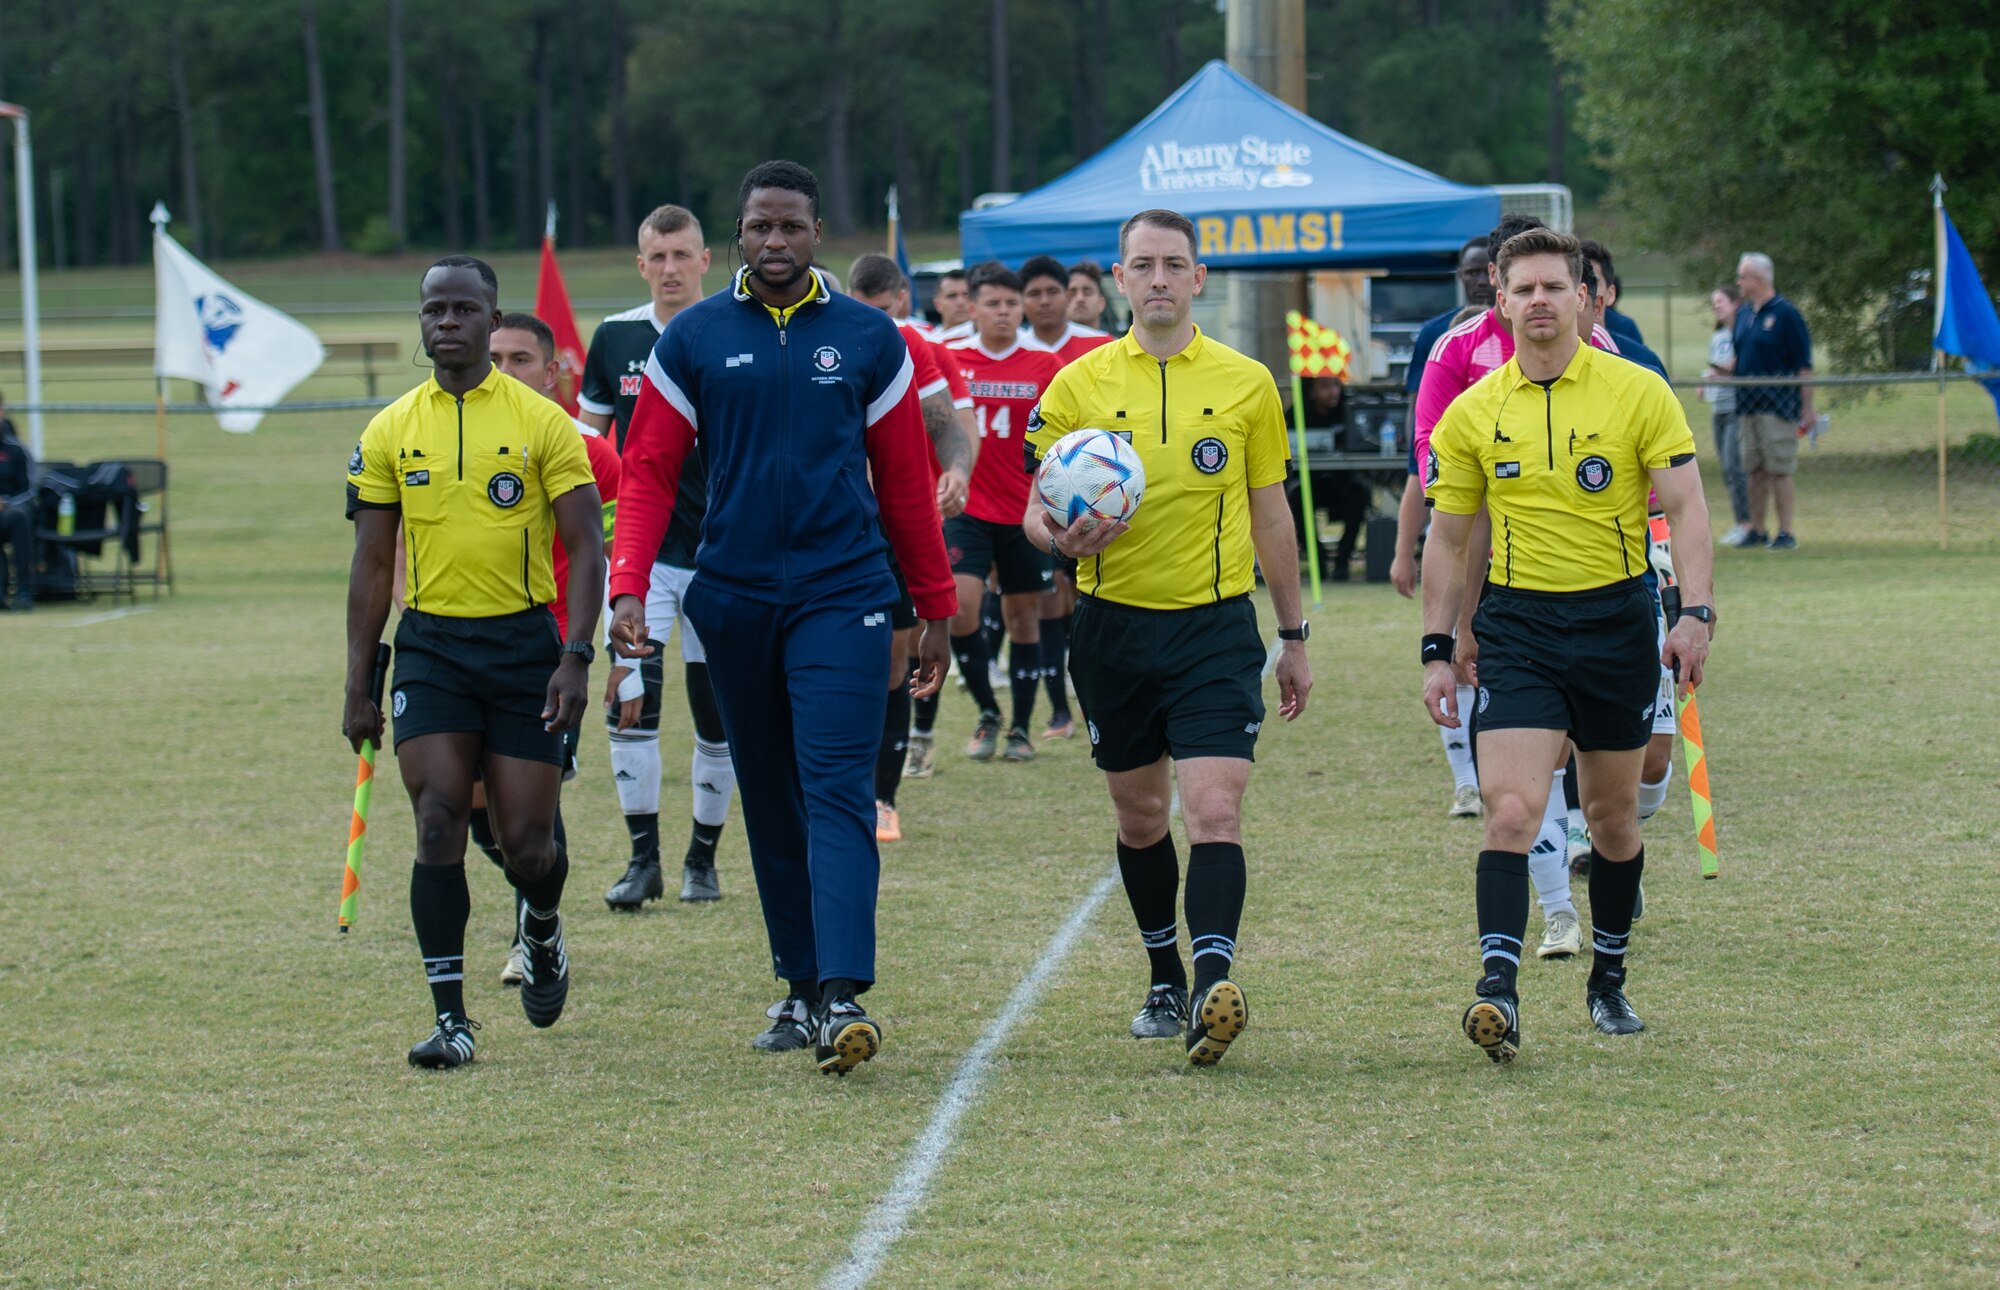 Referees prepare for a soccer game